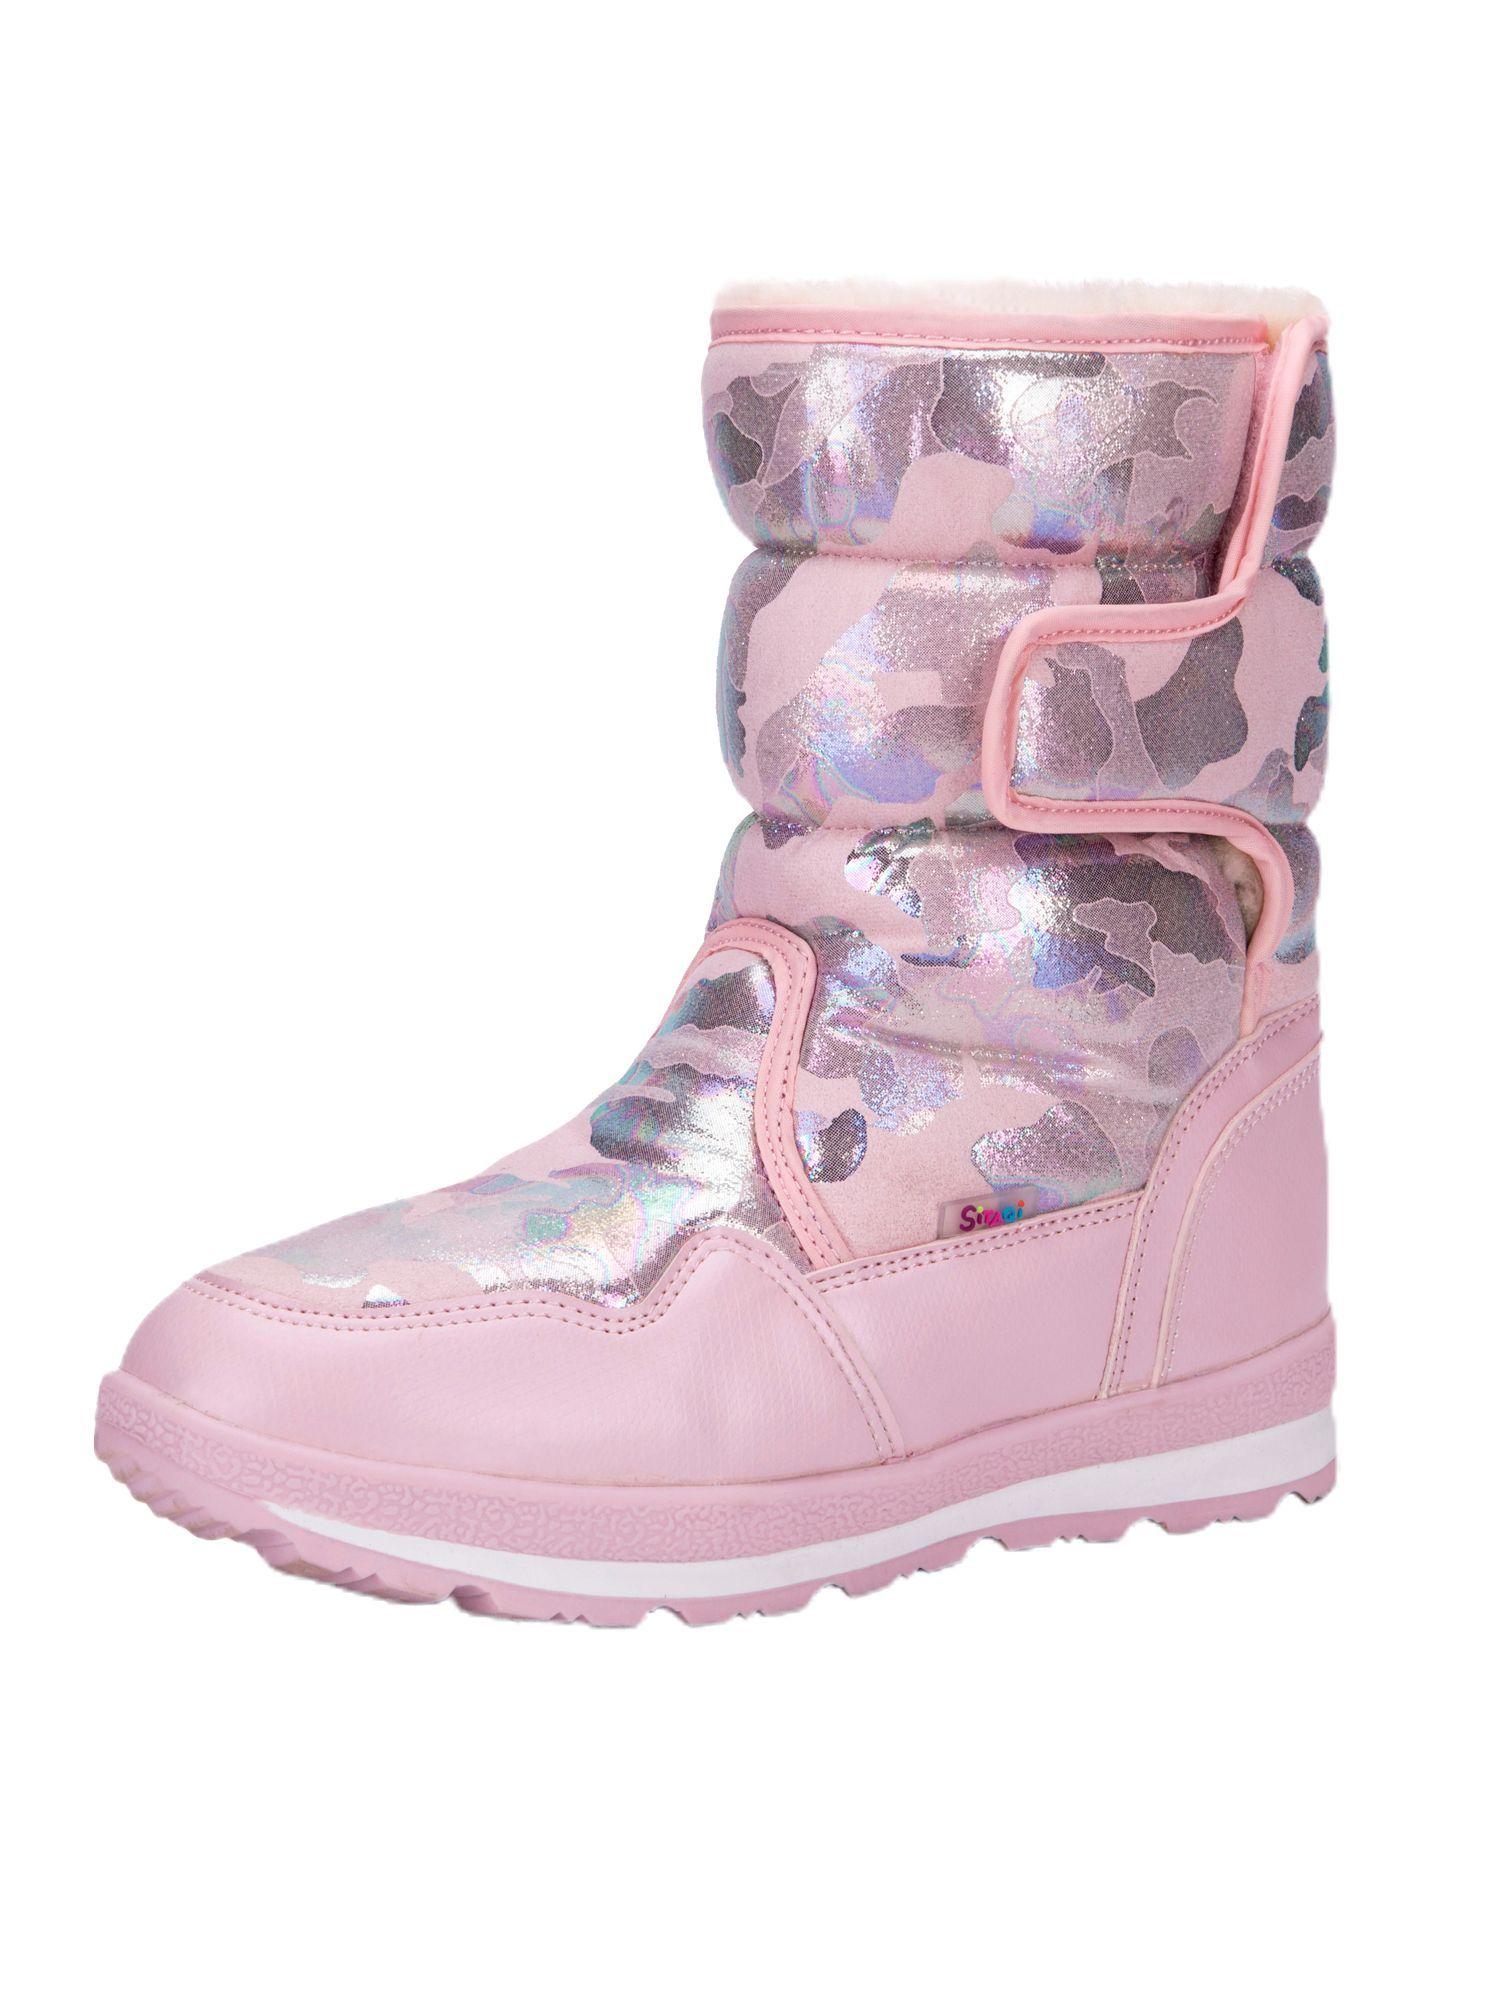 pink and silver glam girls winter snow boots